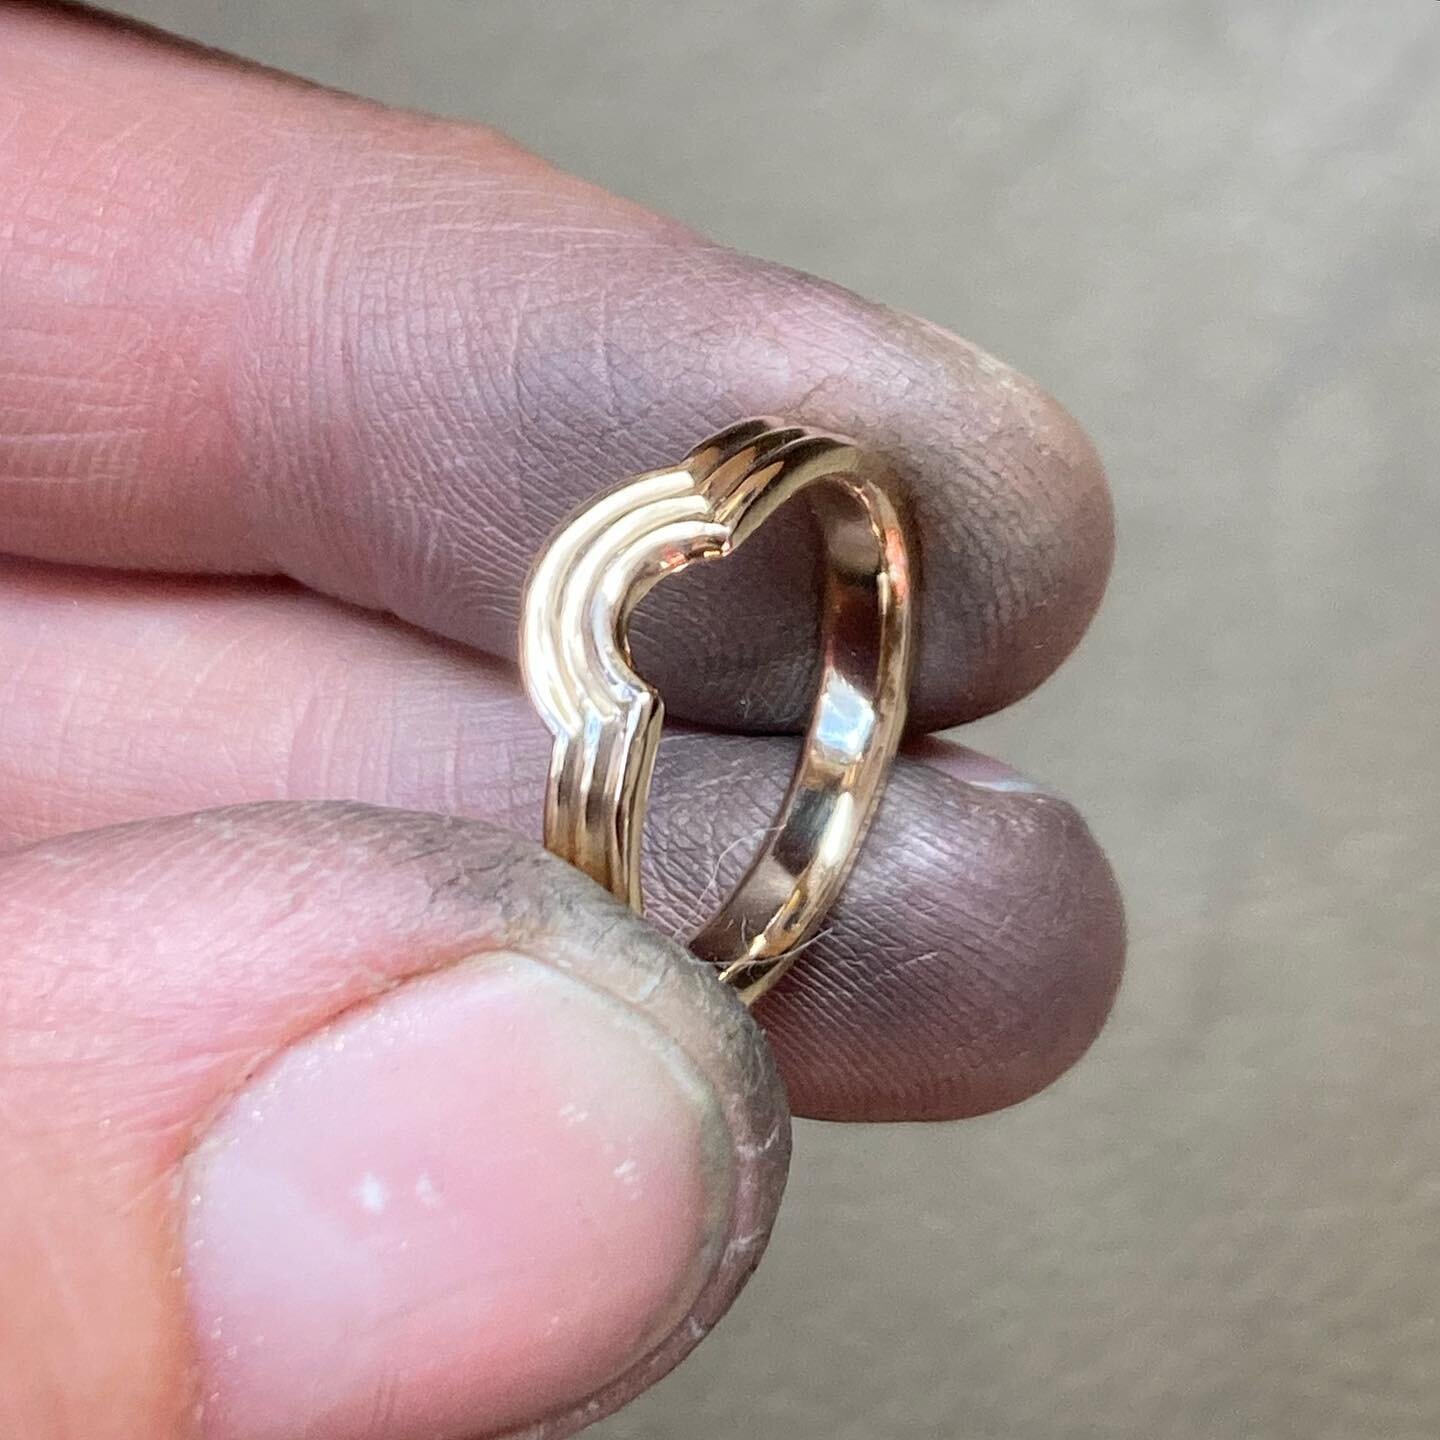 Recently finished contoured wedding ring for the incredibly patient @sangeeta_banerjee. Sangeeta came to one of my London workshops a few years ago and was kind enough to remember me when her partner Asa popped the question. They wanted to use some i